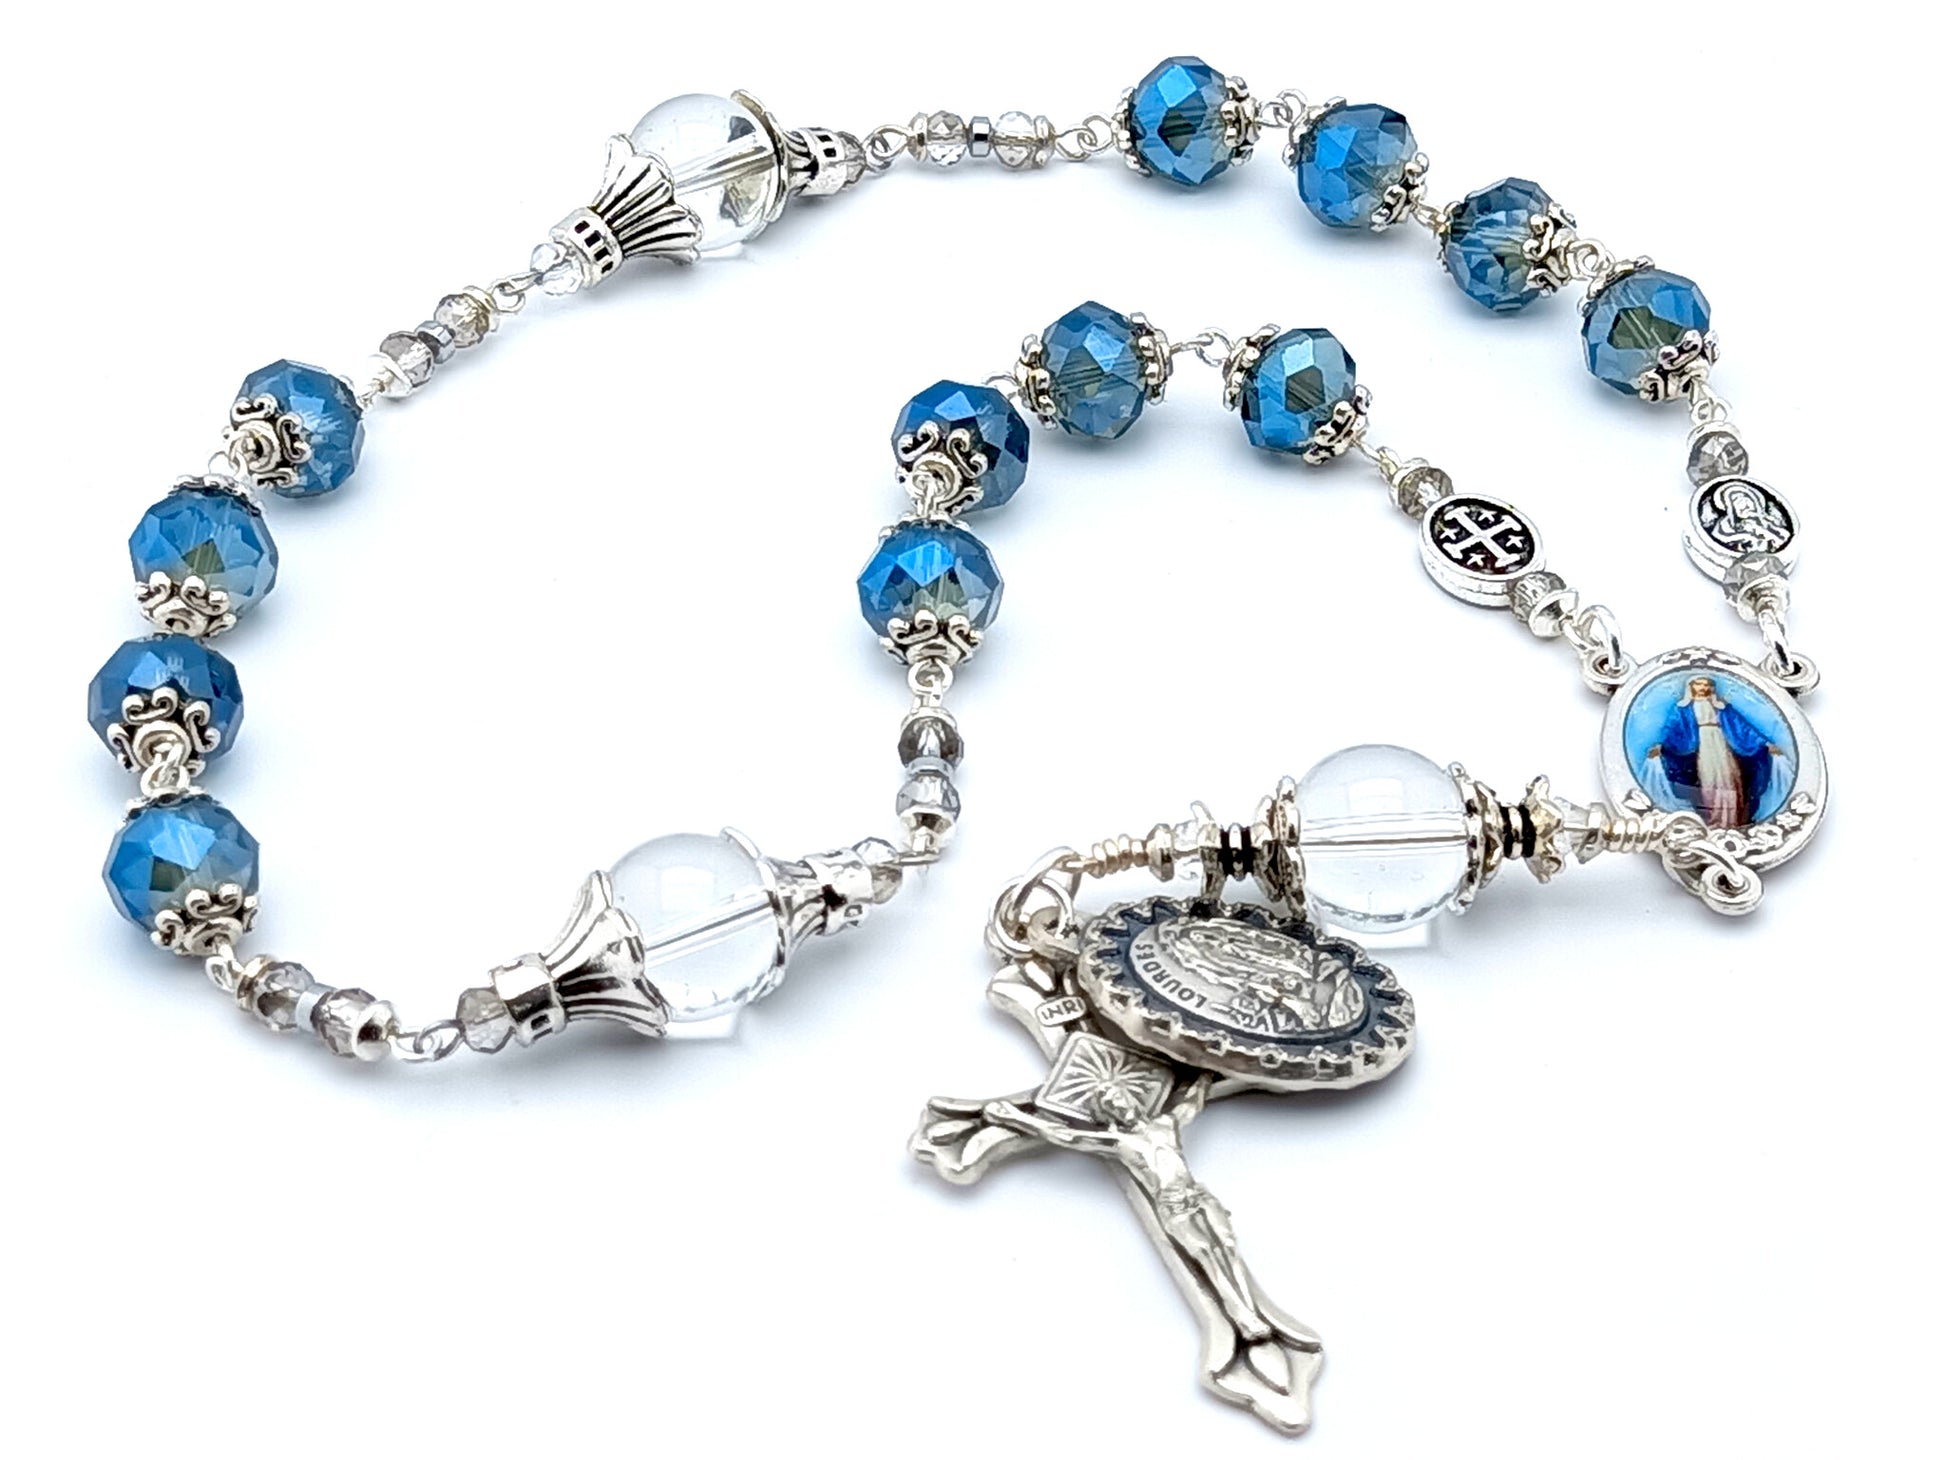 The Immaculate Conception unique rosary beads prayer chaplet with blue crystal faceted and clear crystal beads, picture centre medal and silver sunburst crucifix and Our Lady of Lourdes medal.